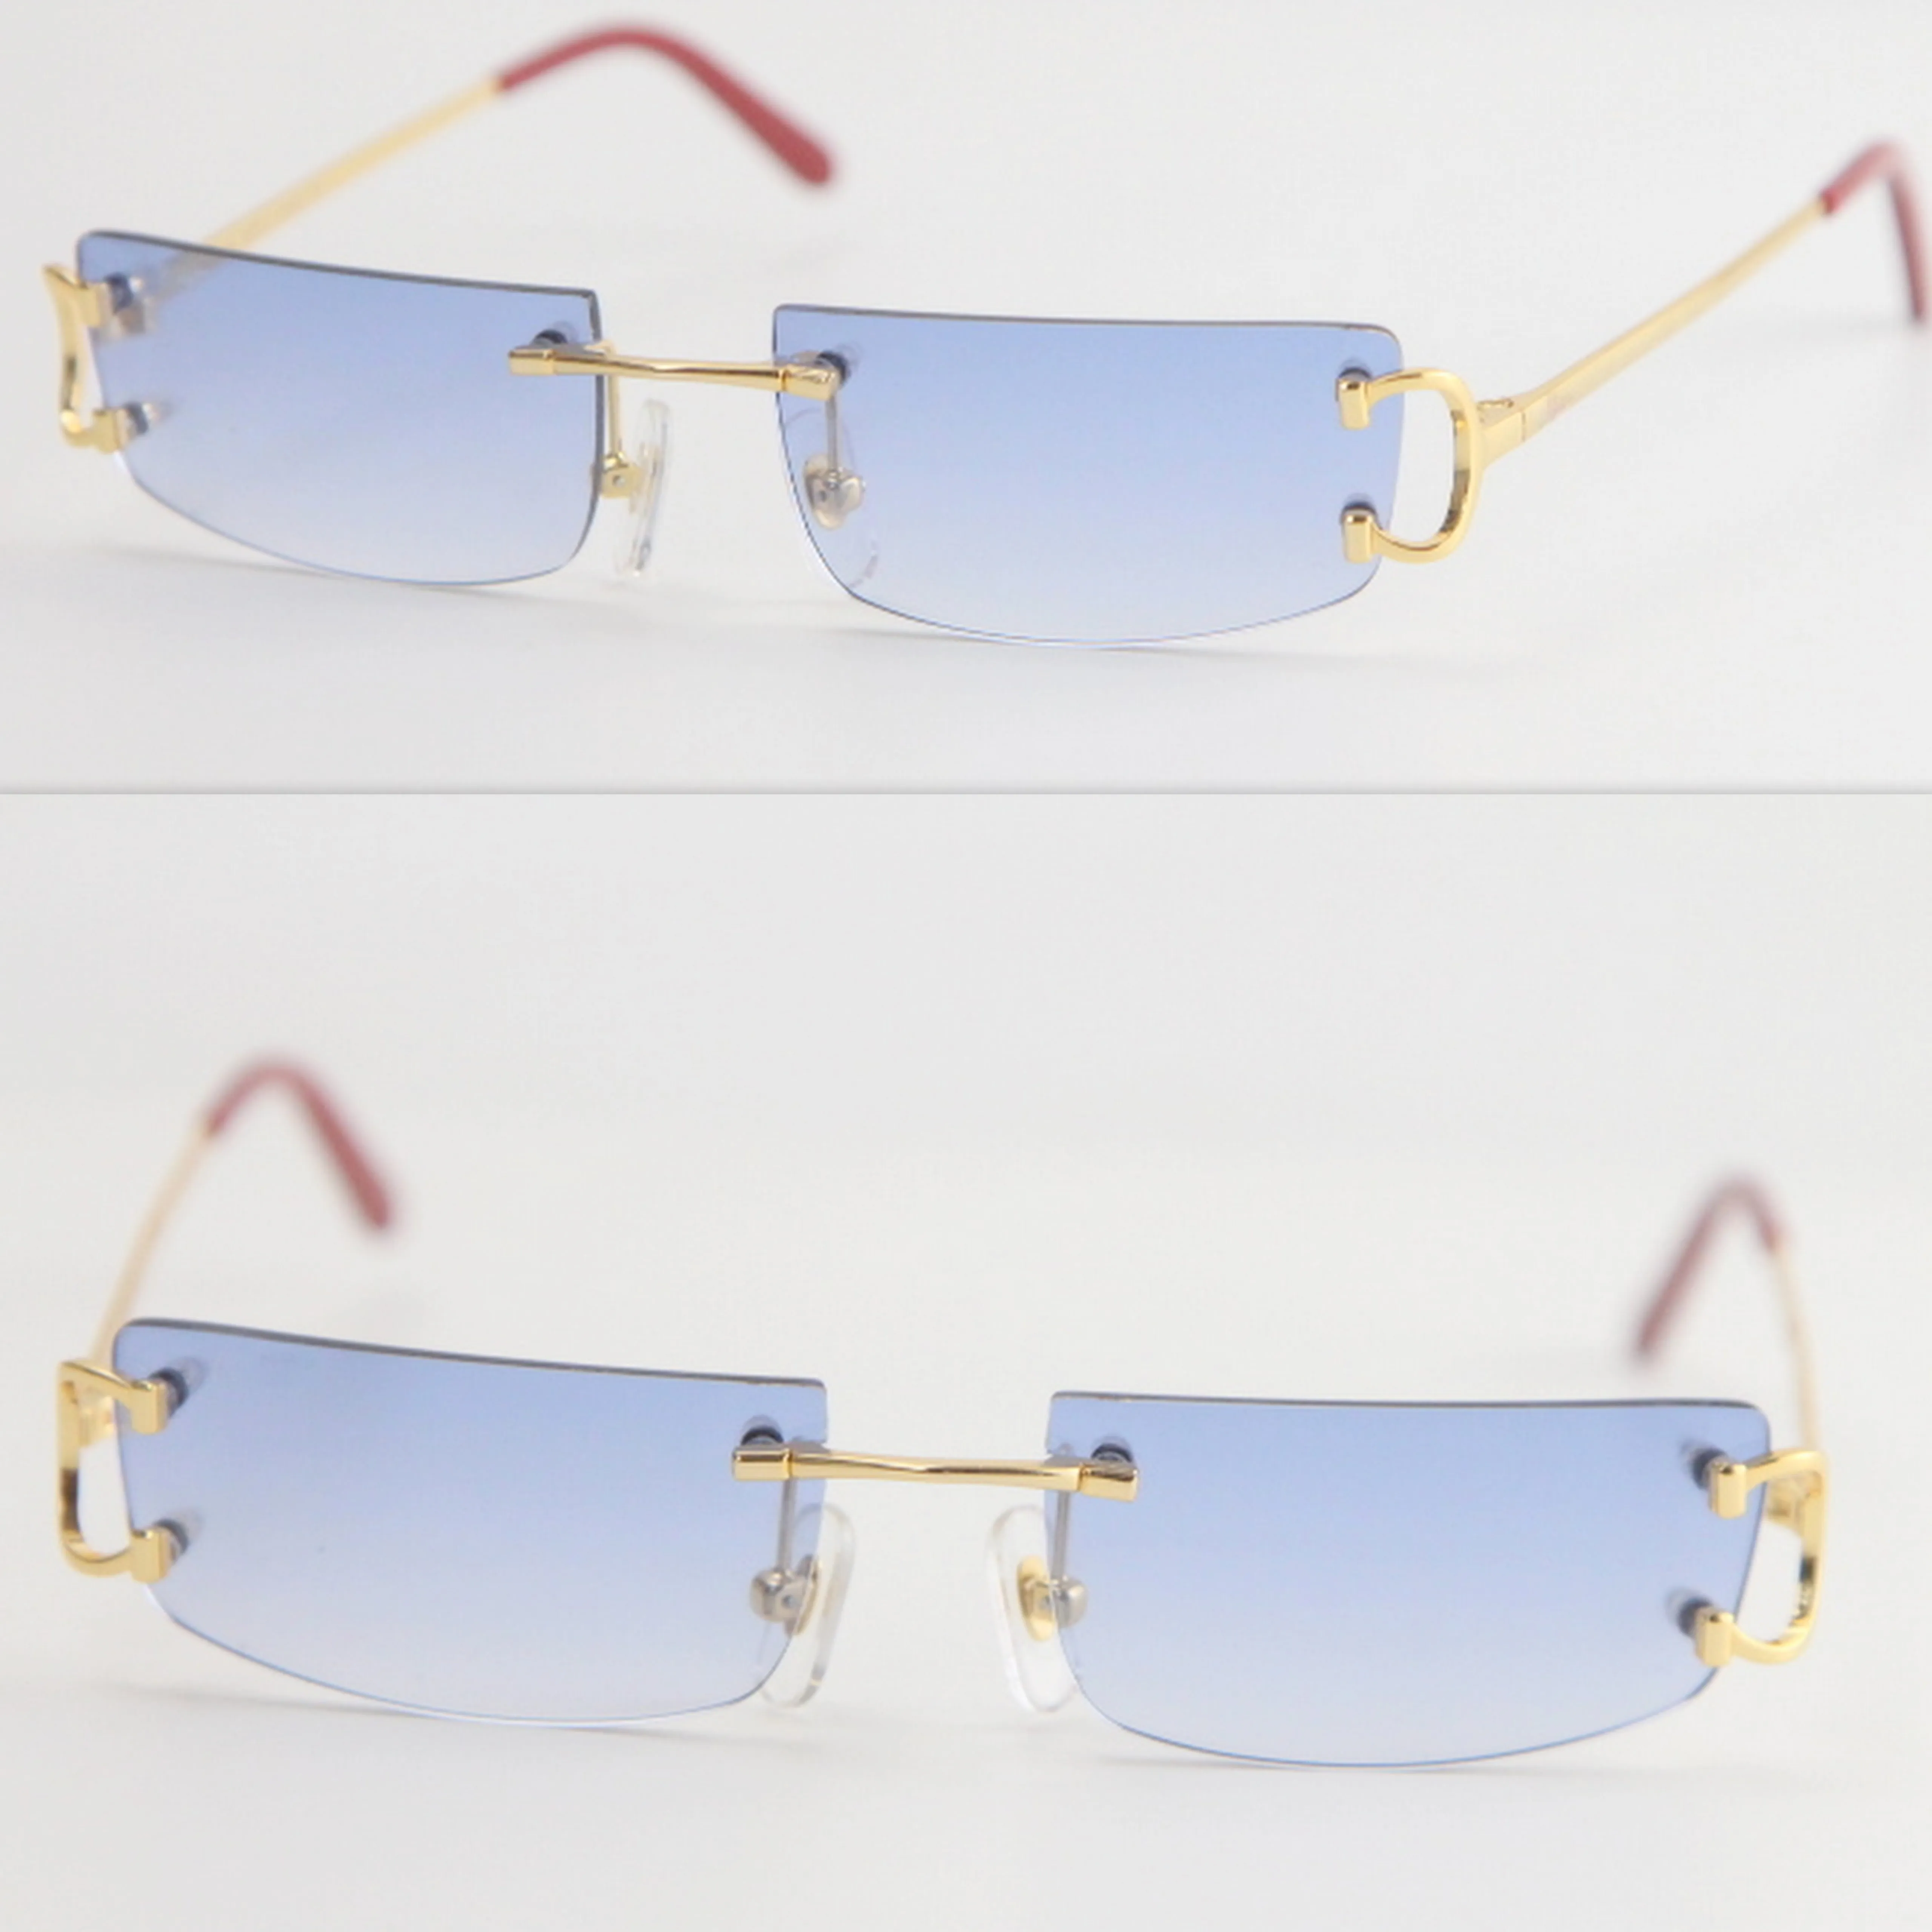 Metal Small Square Rimless Sunglasses Men Women C Decoration Unisex Eyewear for Summer Outdoor Traveling gold frame Size52-18-140288s